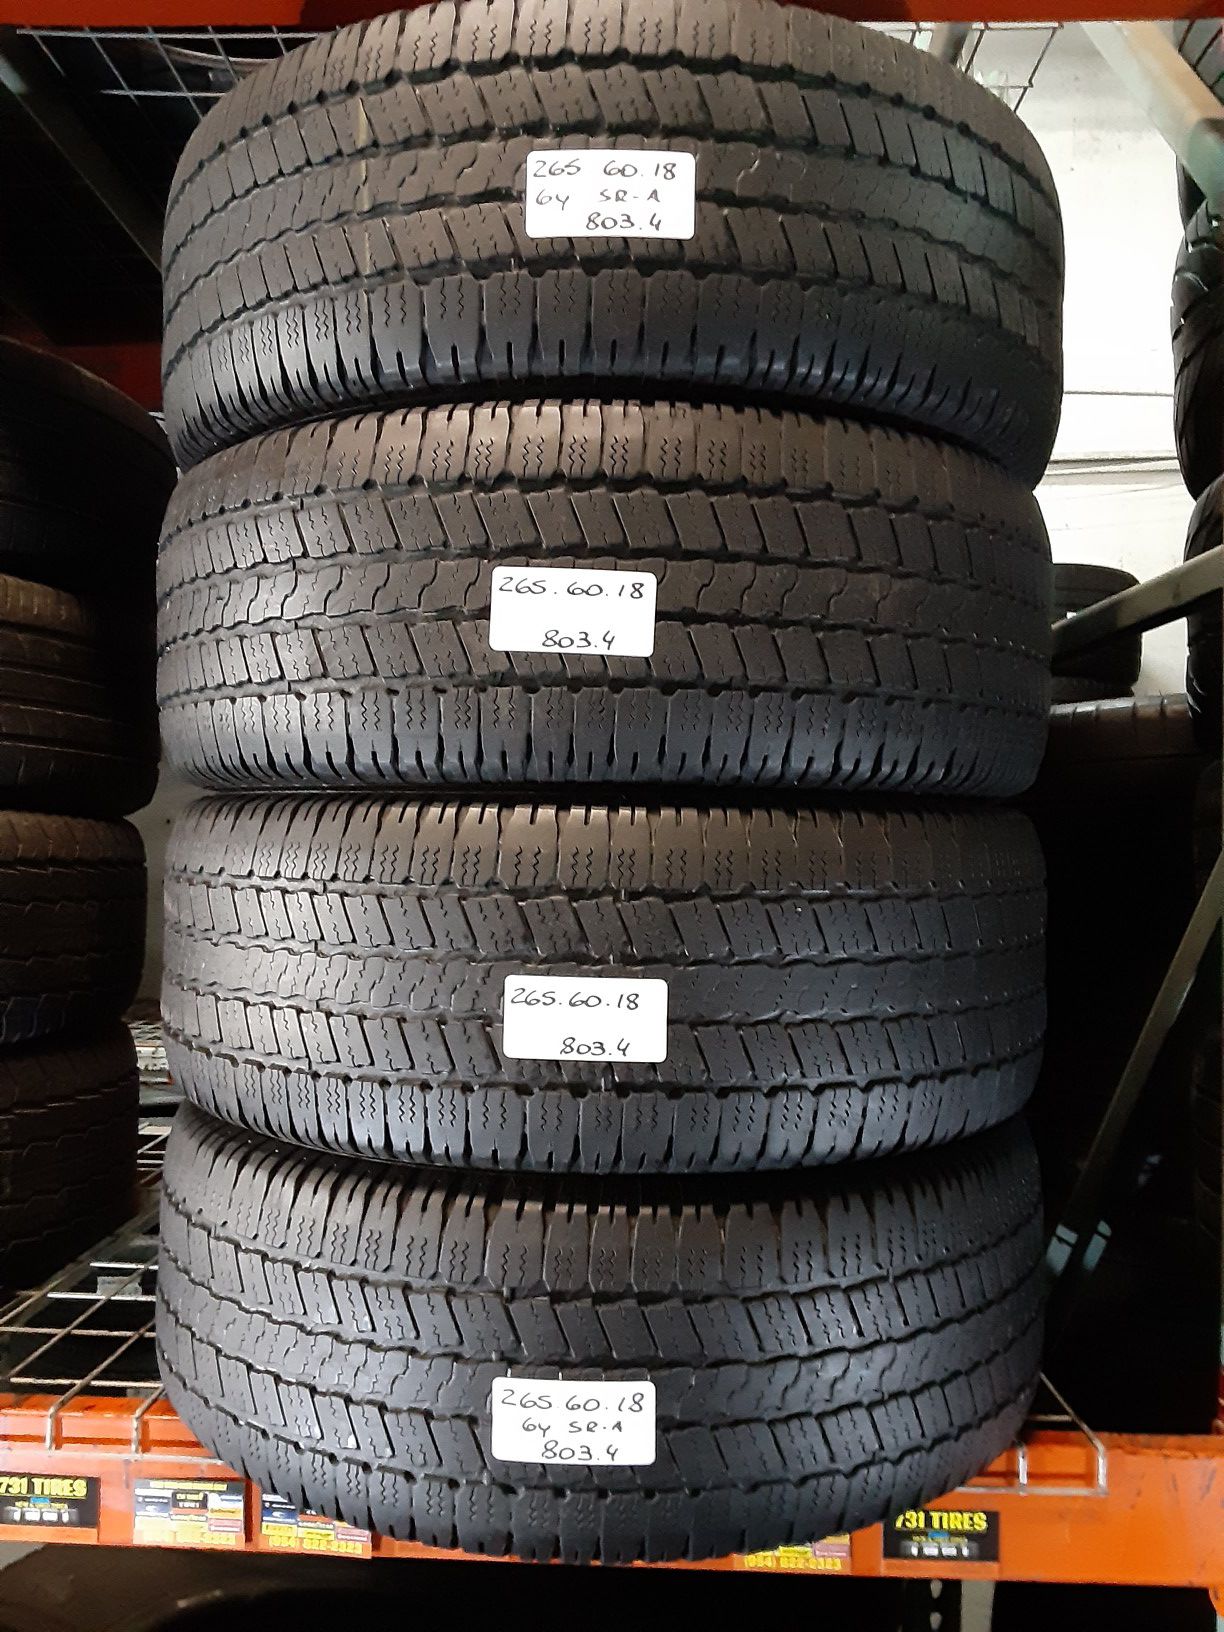 4) USED TIRES P265/60R18 GOODYEAR WRANGLER SR-A 265/60R18 MATCHING FULL SET  ALL SEASON TIRES 265 60 18 for Sale in Fort Lauderdale, FL - OfferUp